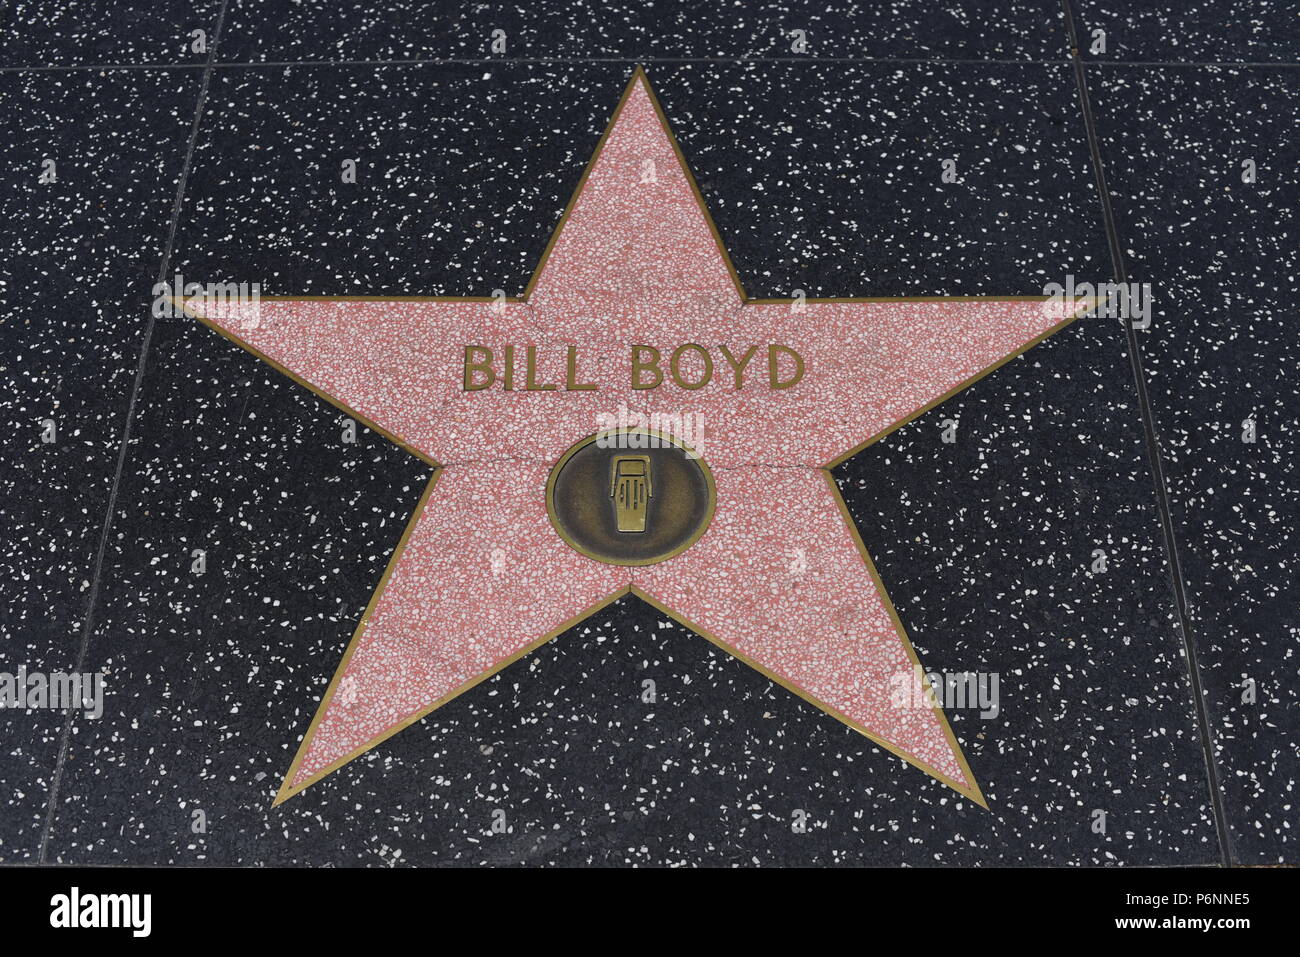 HOLLYWOOD, CA - June 29: Bill Boyd star on the Hollywood Walk of Fame in Hollywood, California on June 29, 2018. Stock Photo